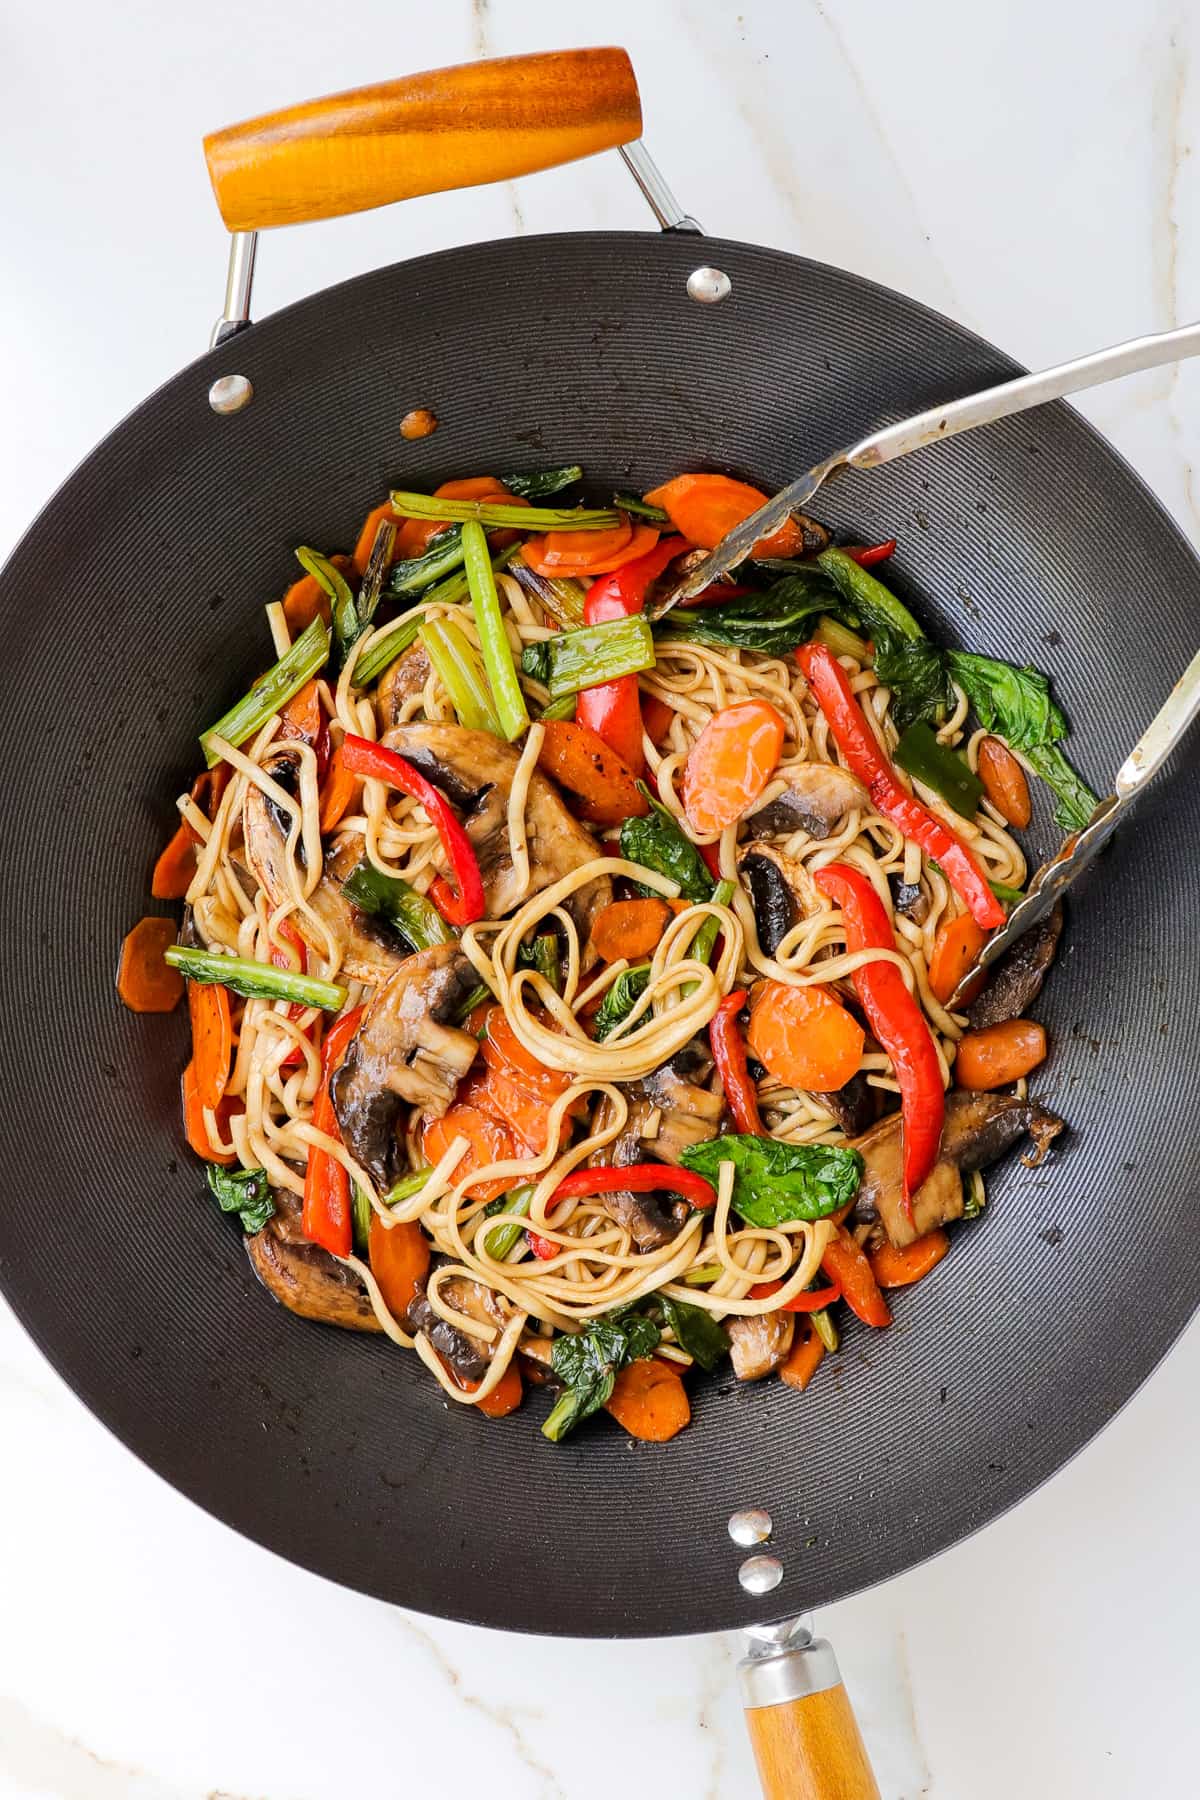 Vegetables and udon noodles in a wok.